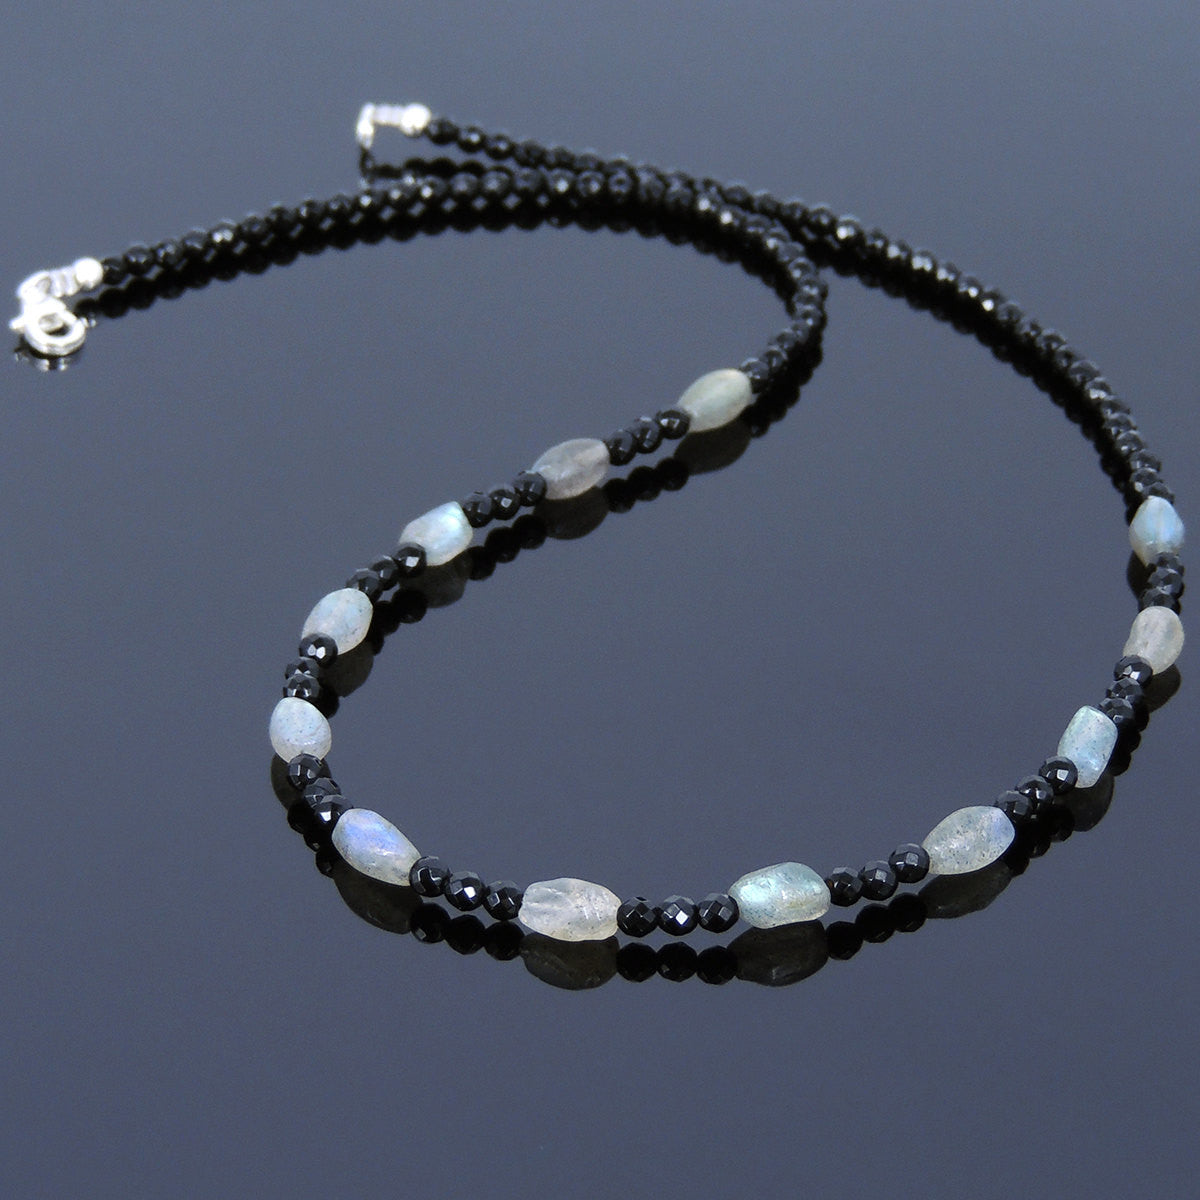 Labradorite & Faceted Black Onyx Healing Gemstone Necklace with S925 Sterling Silver Spacer Beads & Clasp - Handmade by Gem & Silver NK118